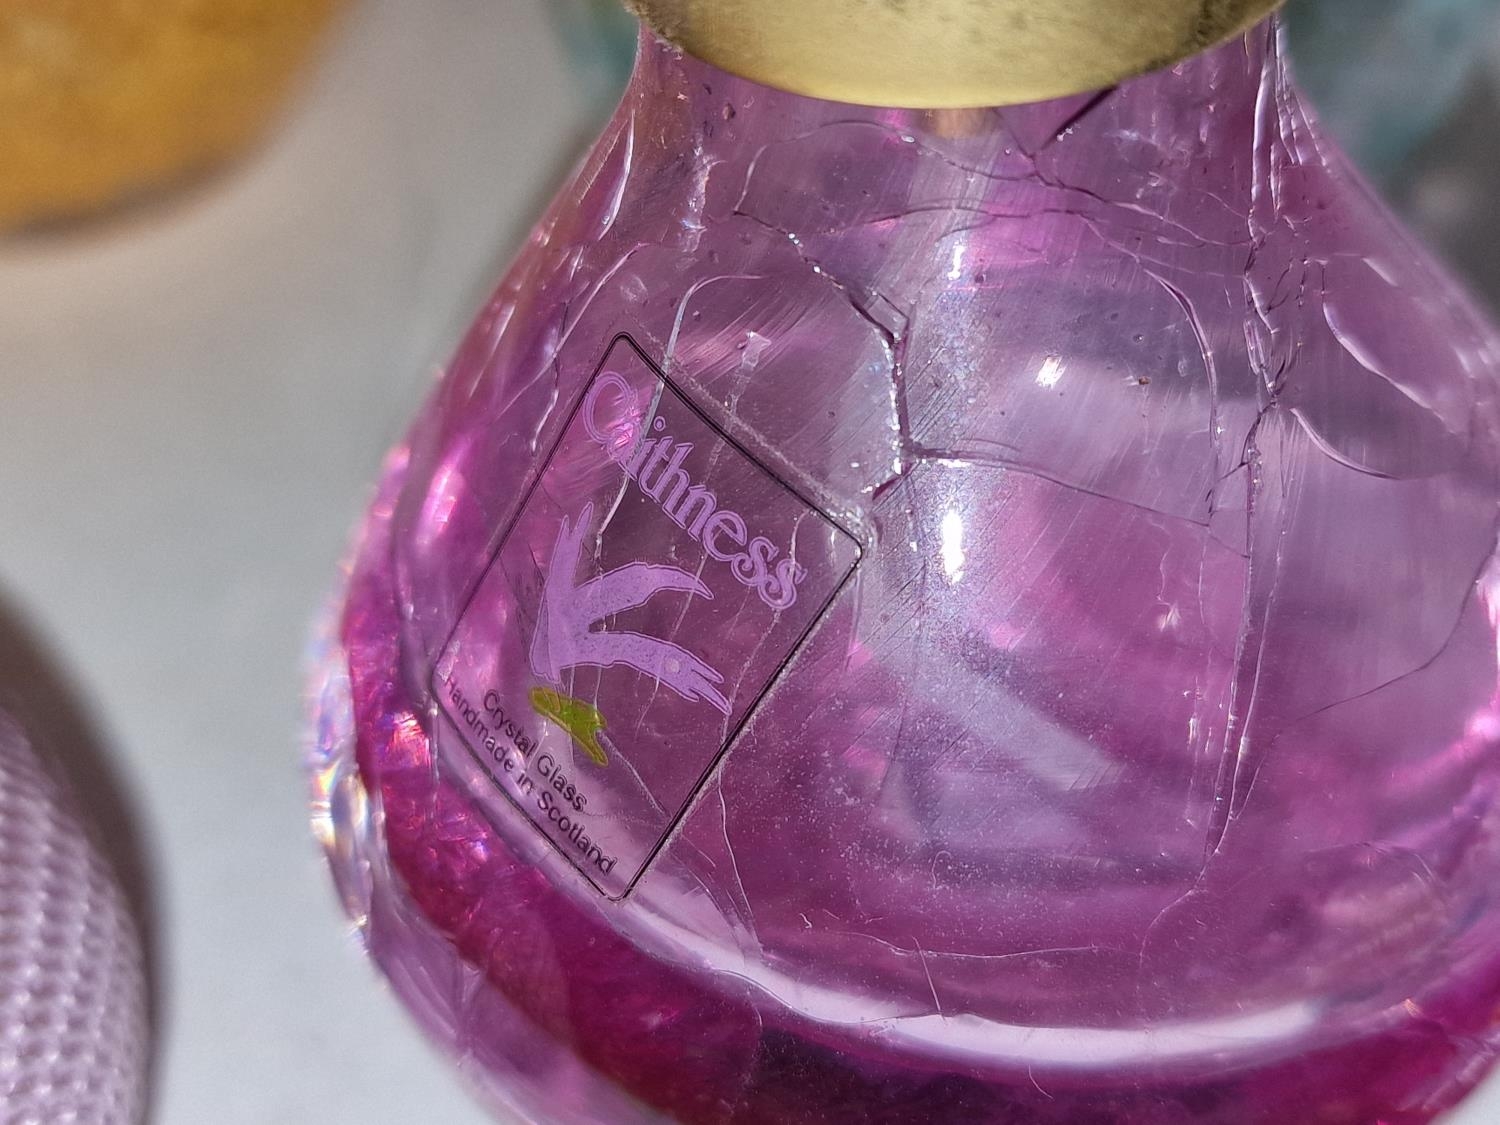 Caithness collection of glass perfume atomiser bottles many still with Caithness stickers - Image 4 of 4